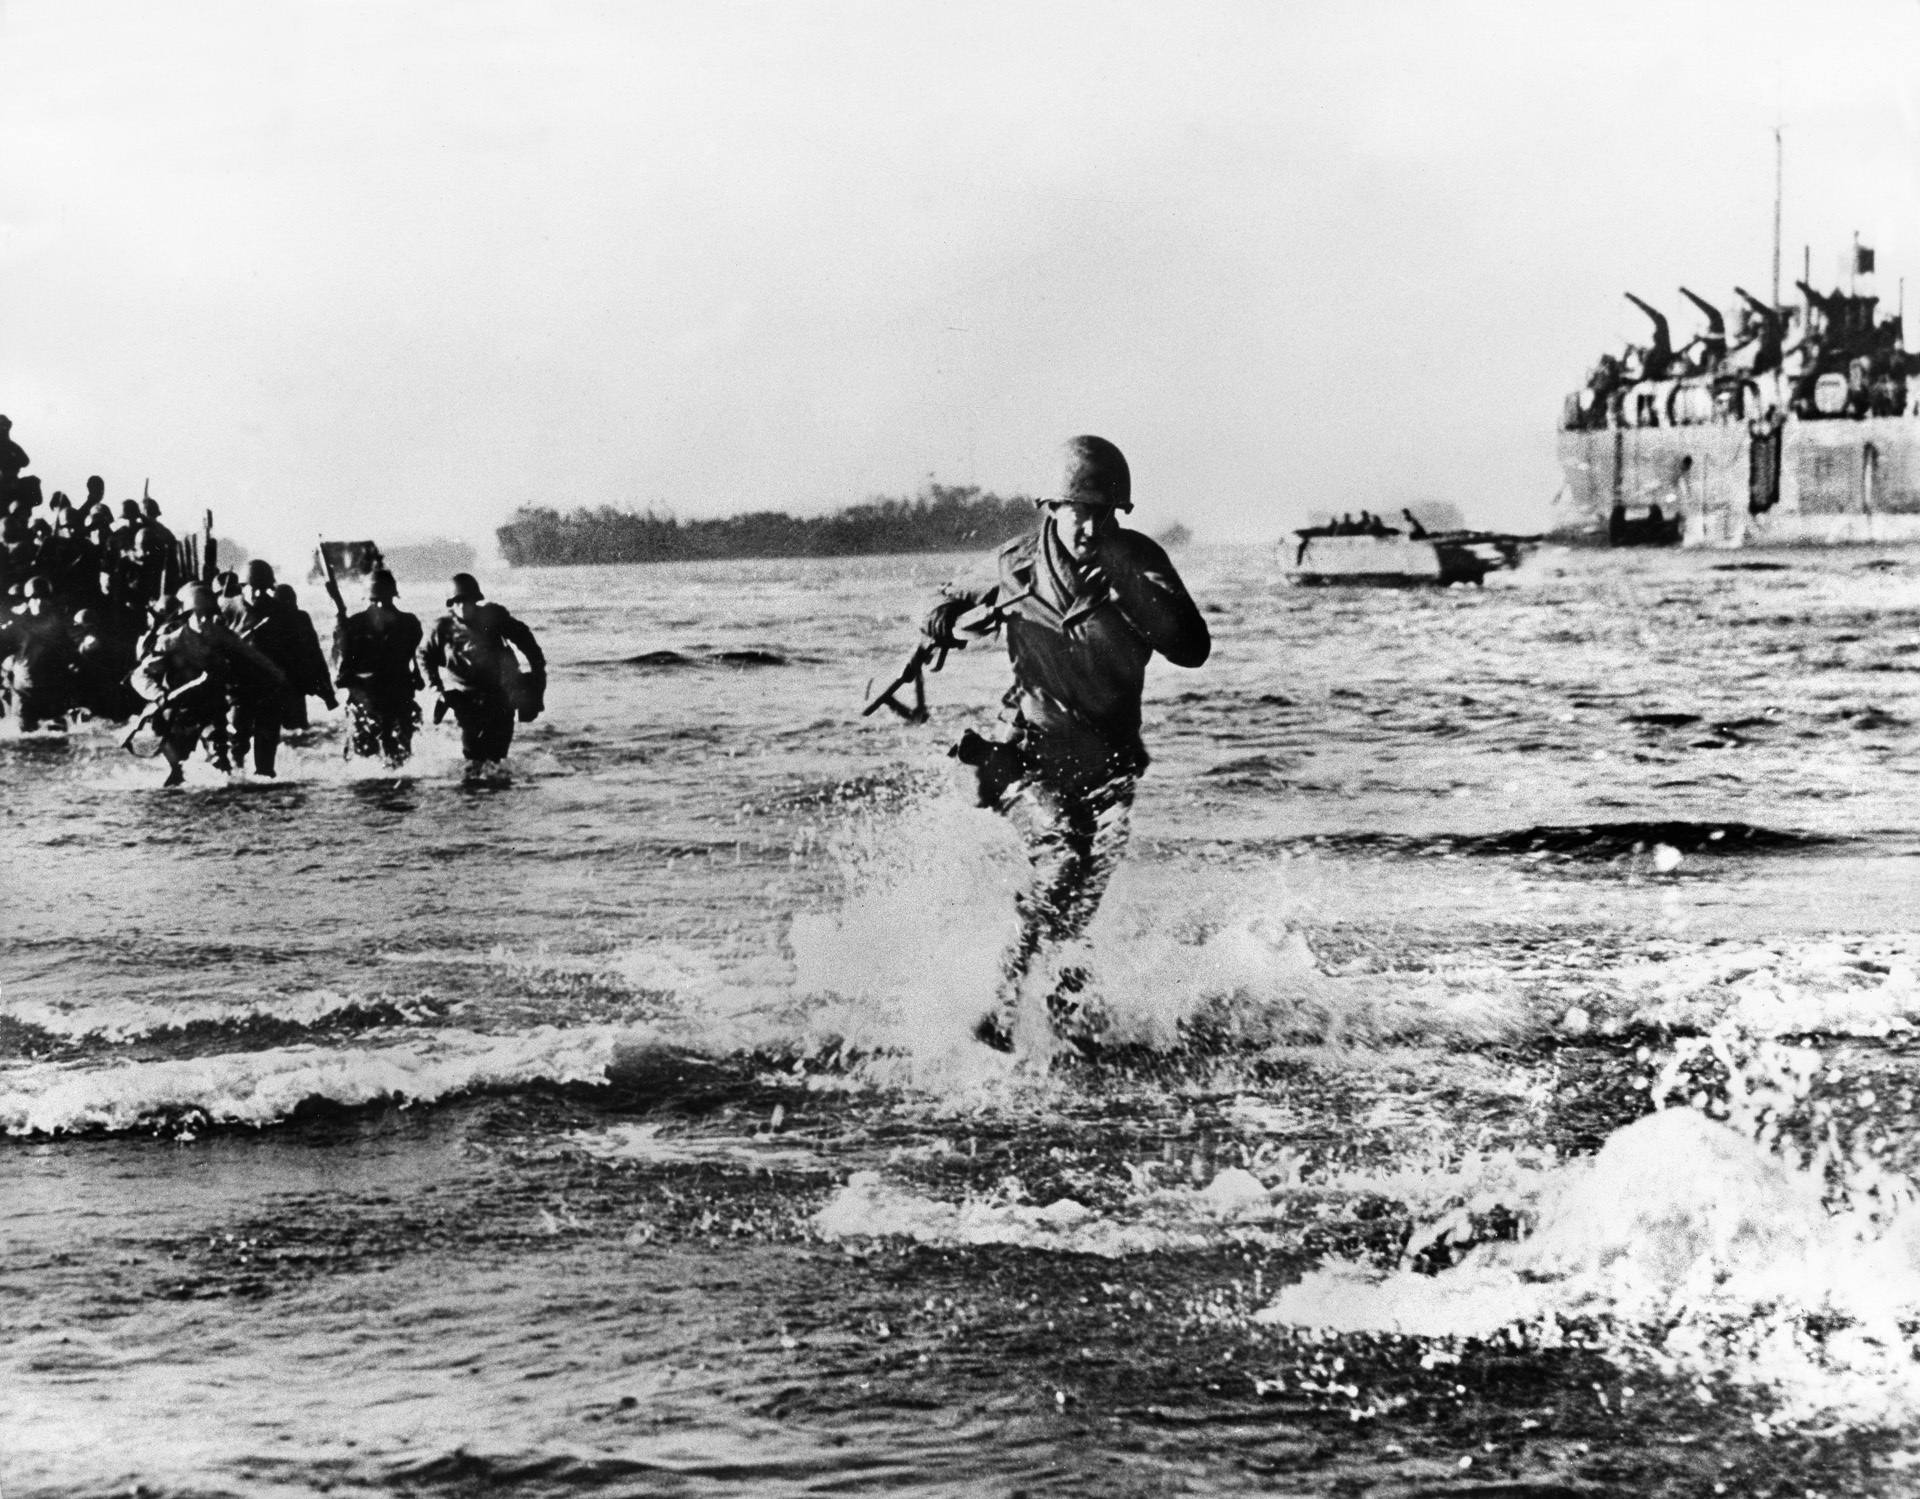 American soldiers splash ashore at Anzio, Italy, during an end run expected to compromise the German defenses of the Gustav Line. The landings failed to achieve the desired results and remain controversial to this day.